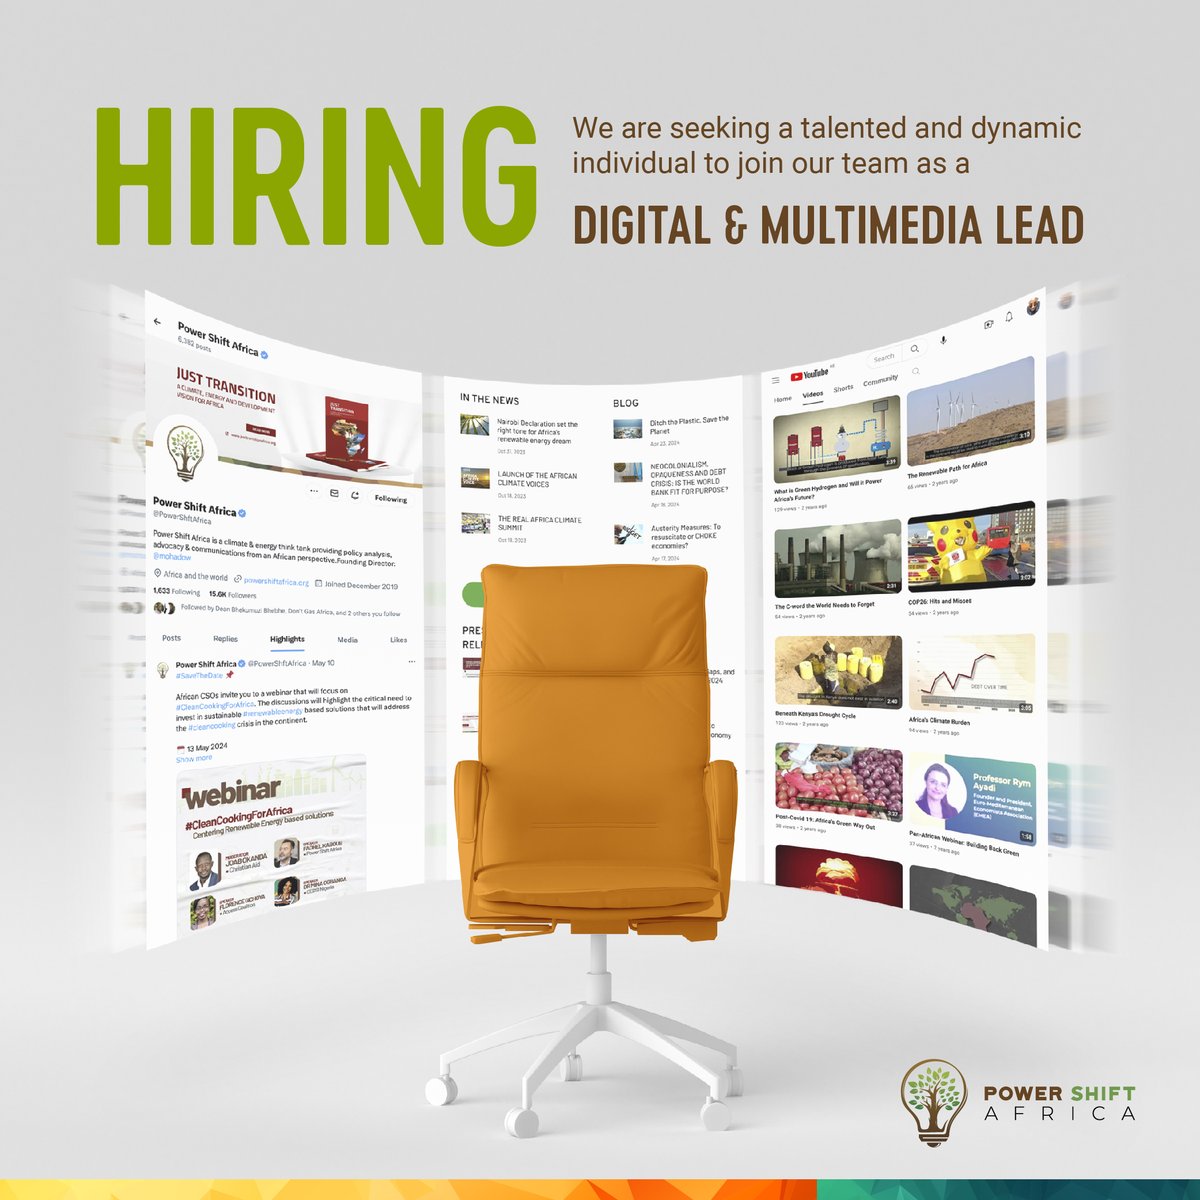 We're #hiring! Power Shift Africa is looking to hire an enthusiastic and highly experienced Digital & Multimedia Lead who will spearhead the development and implementation of our #digital engagement and #storytelling strategy. Interested applicants should submit a cover letter